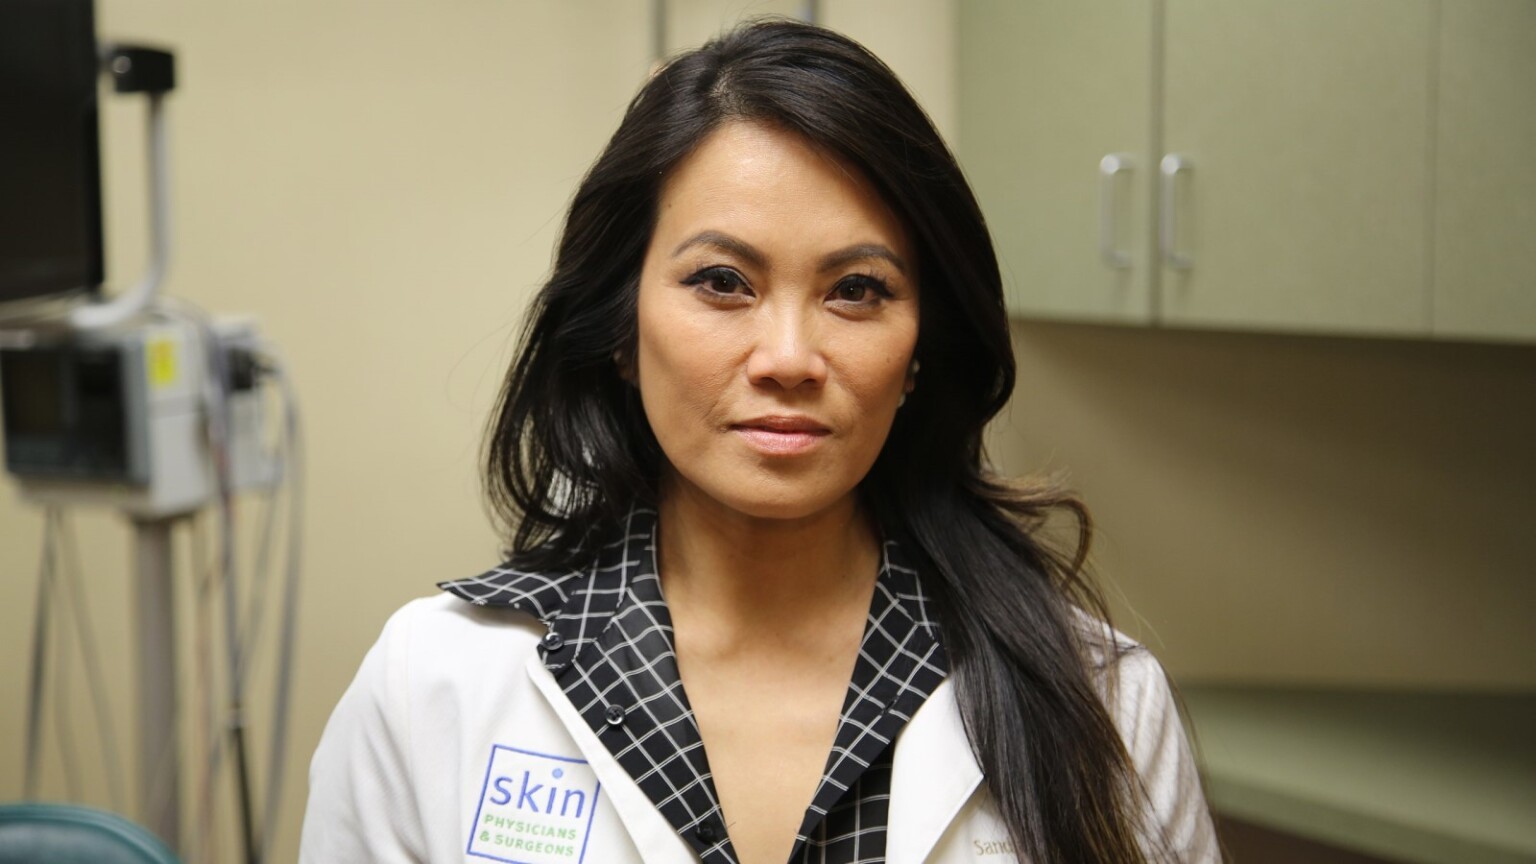 Dr. Pimple Popper New Episode Before The Pop On TLC